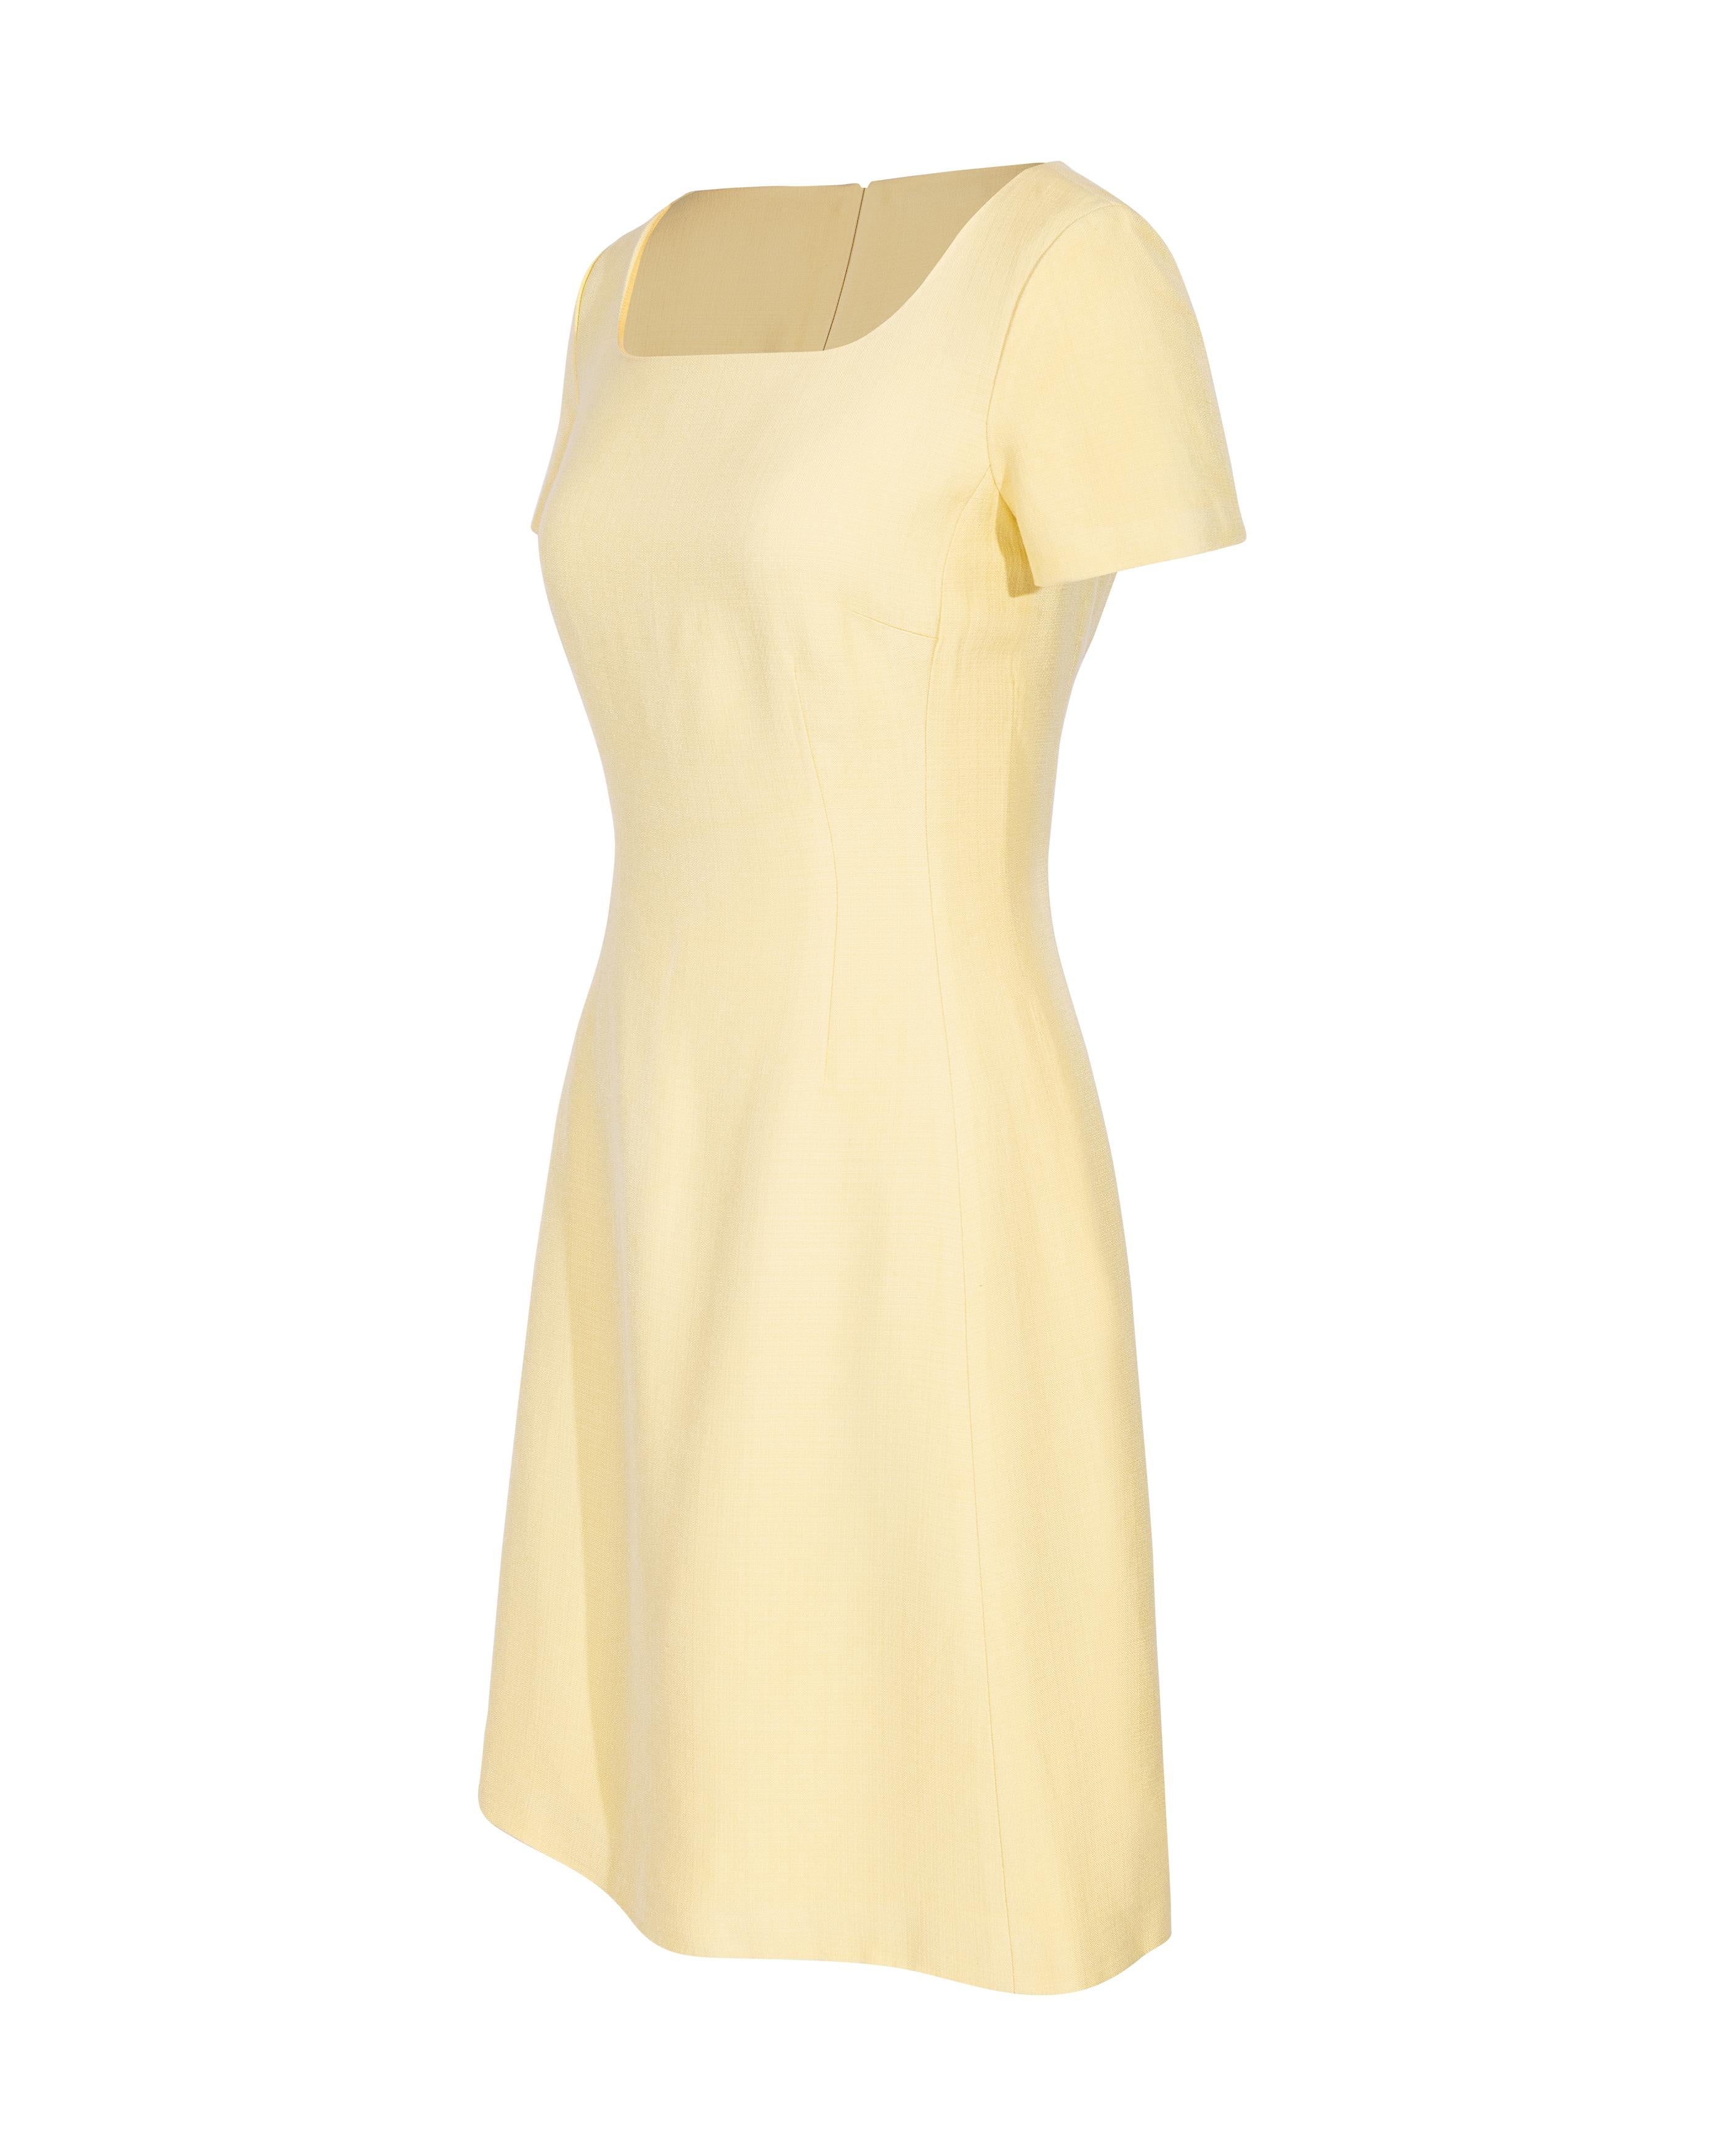 S/S 1992 Prada by Miuccia Prada Butter Yellow Short Sleeve Mini Dress In Good Condition In North Hollywood, CA